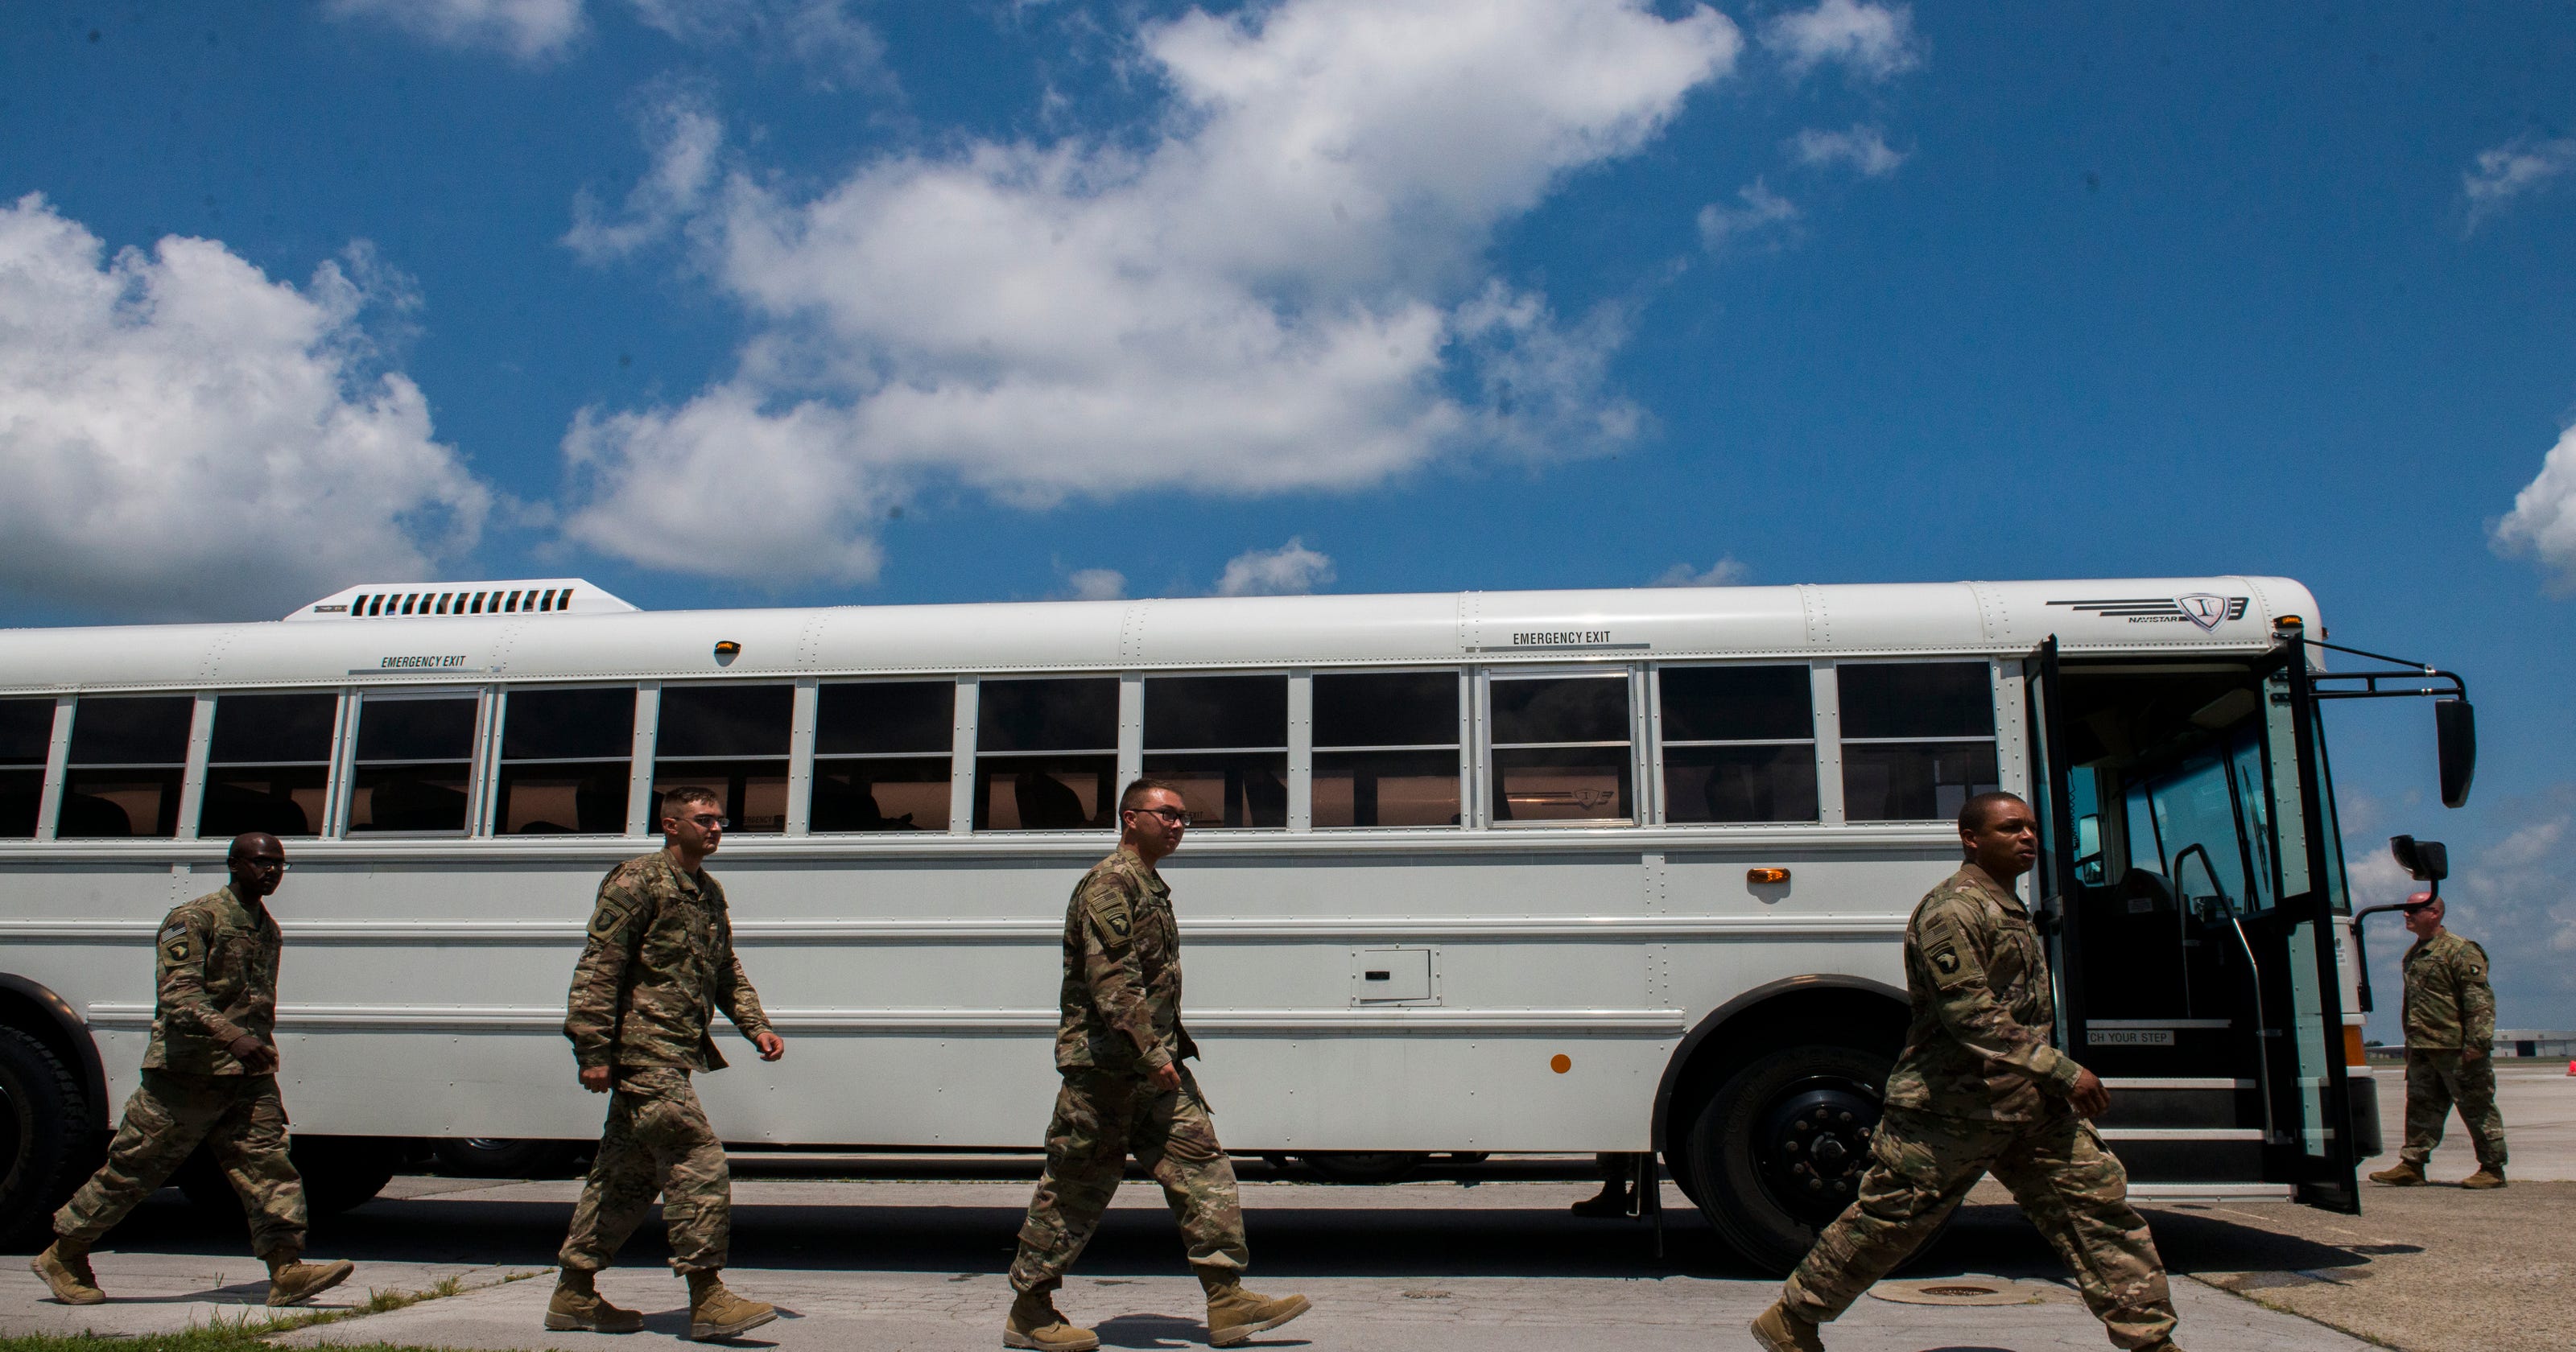 If government shuts down, Fort Campbell soldiers won't be paid until it